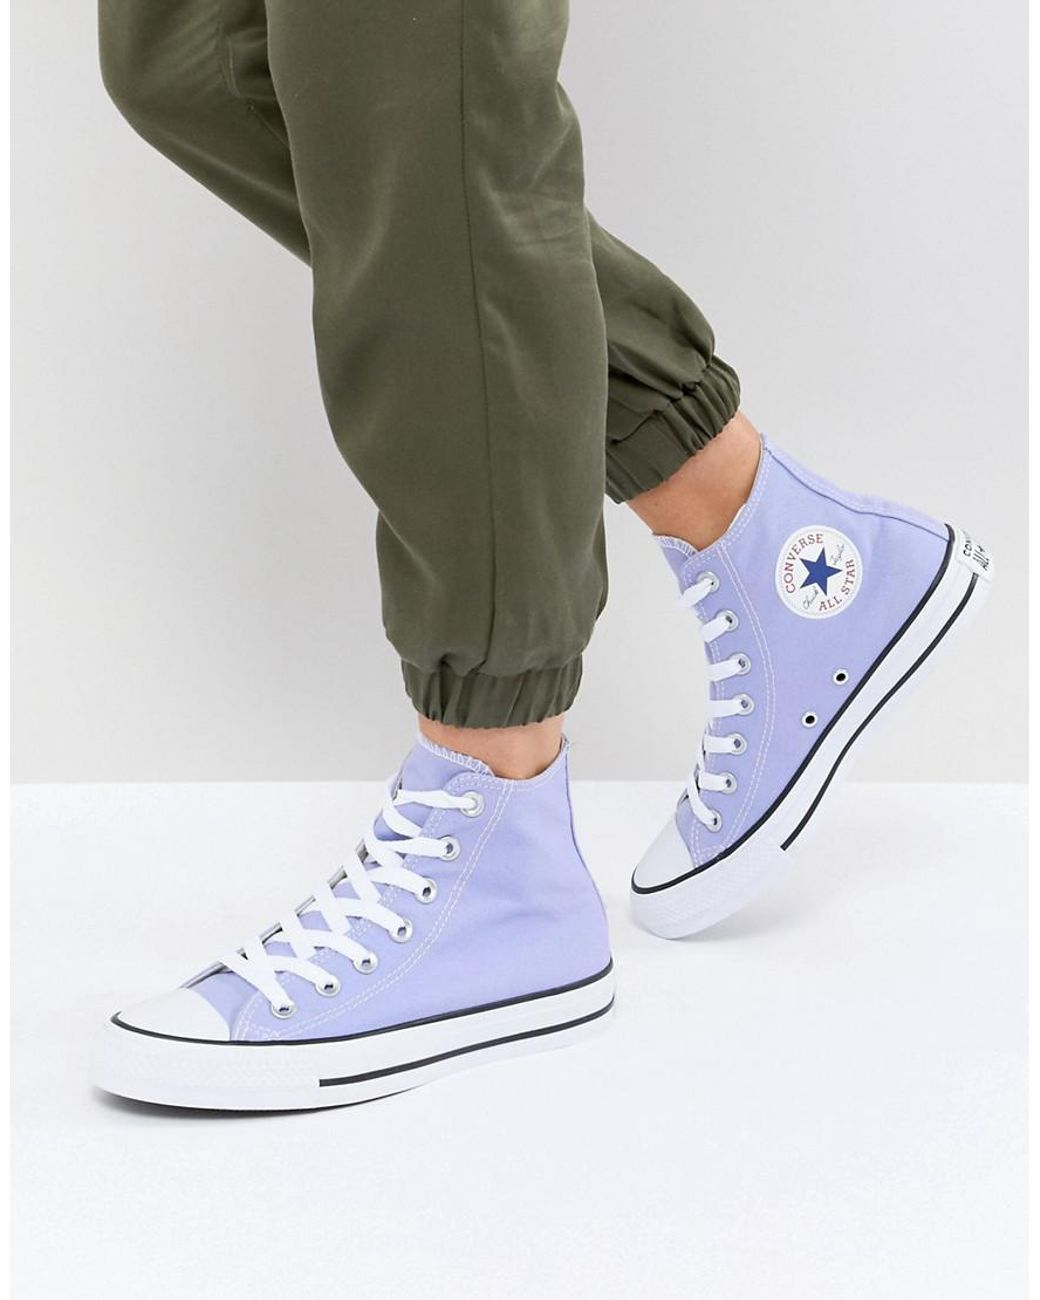 Converse Chuck Taylor All Star Hi Trainers In Lilac in Blue | Lyst